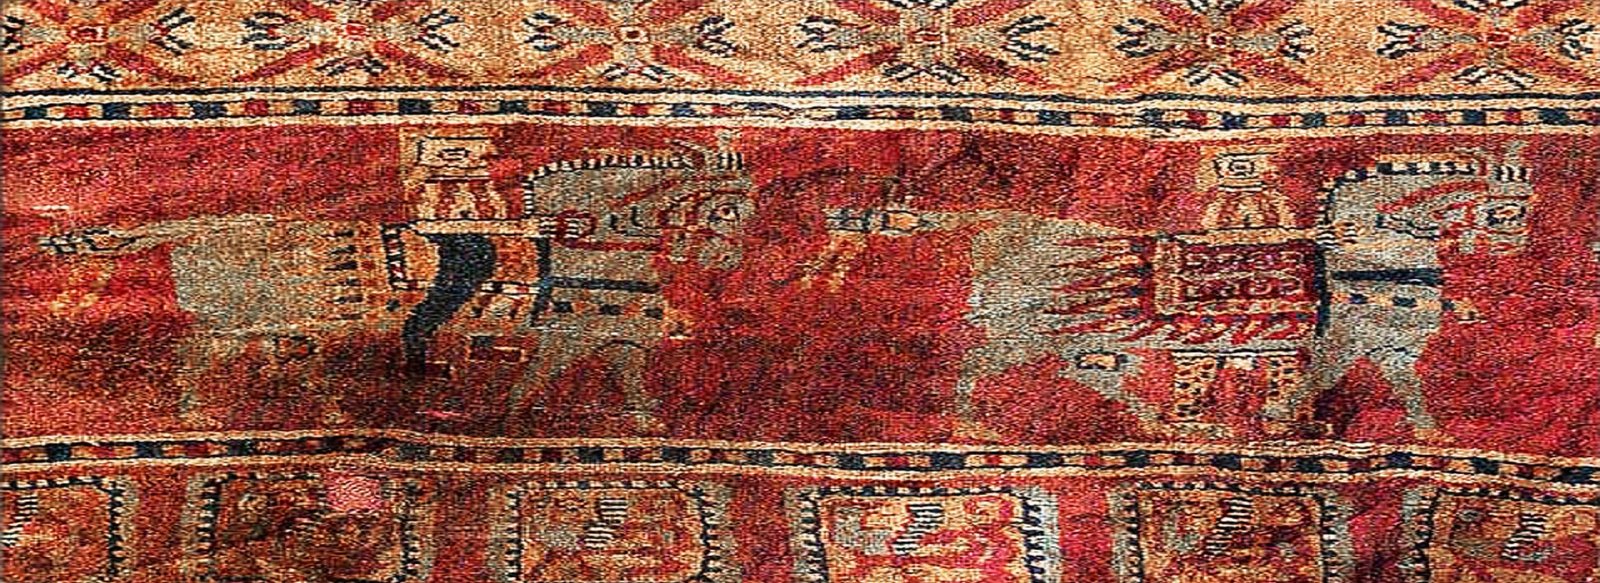 Indian Art of Carpet and Textiles